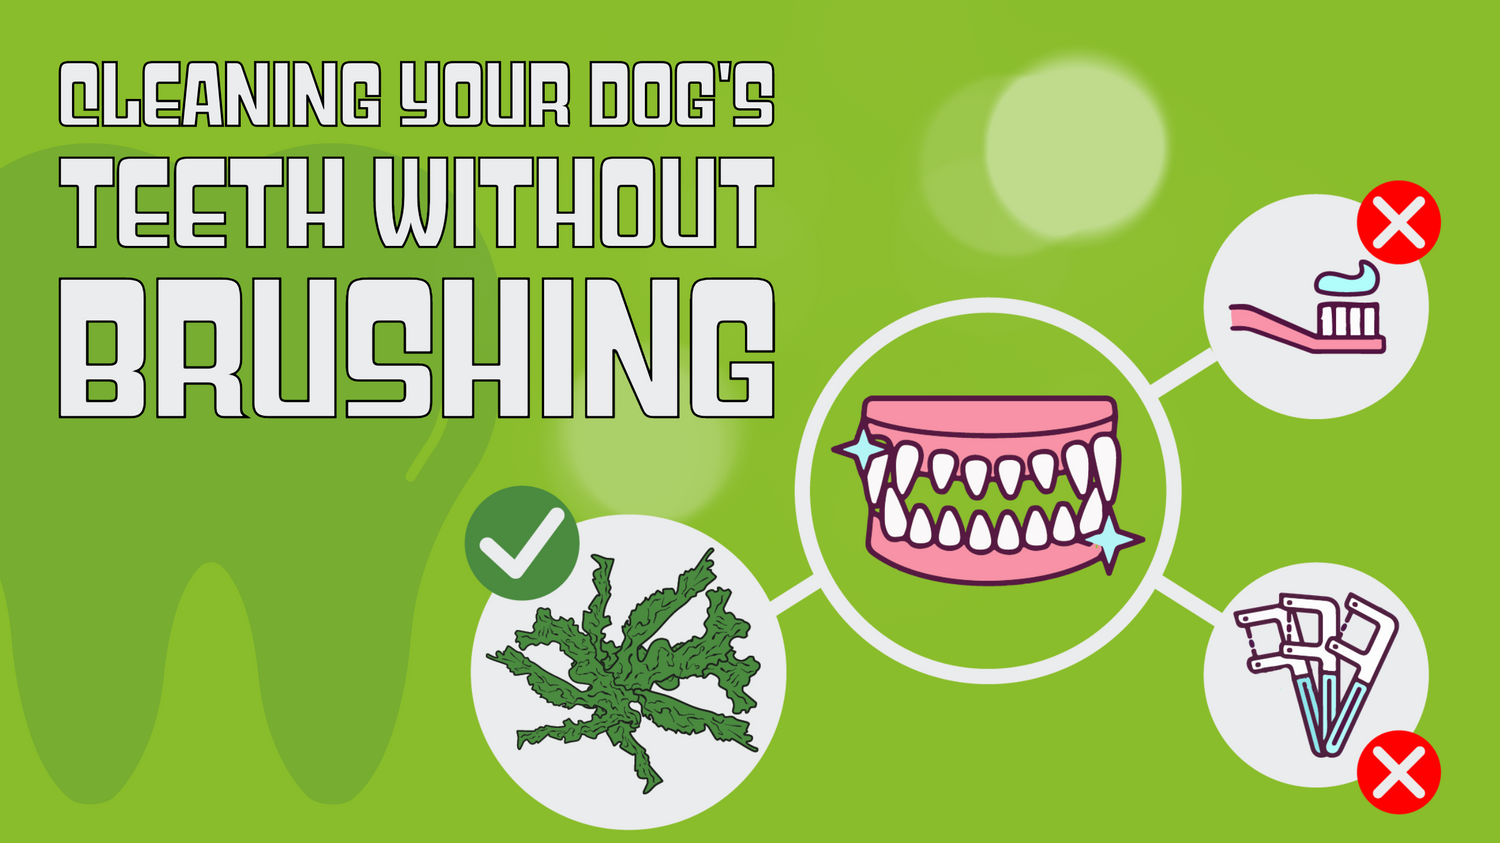 A graphic of shiny dog teeth and seaweed and a box with text “Cleaning Your Dog's Teeth Without Brushing”